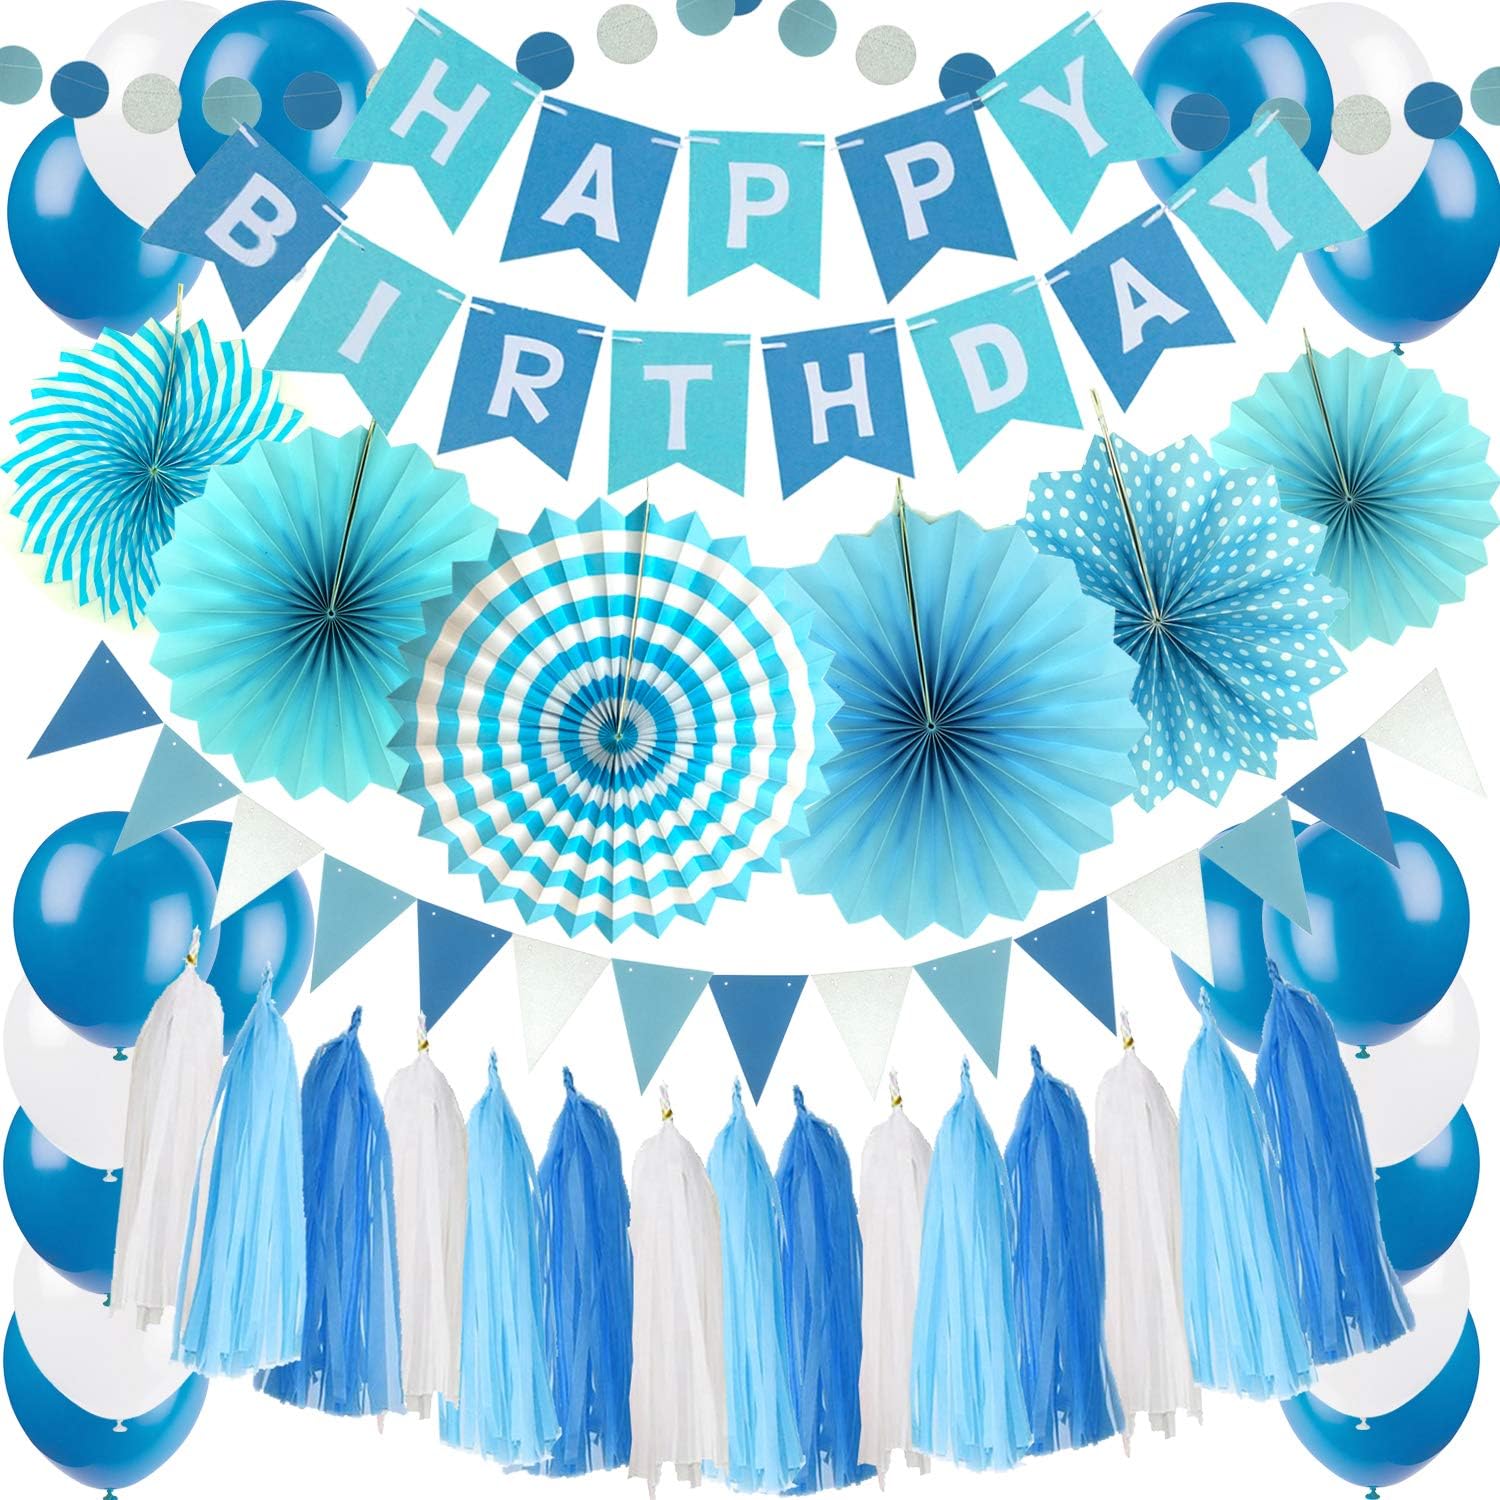 ZERODECO Birthday Party Decoration, Blue Happy Birthday Banner with Paper Fans Garland String Triangle Bunting Flag Tissue Tassel and Balloon for Bday Party Supplies Anniversary Decoration